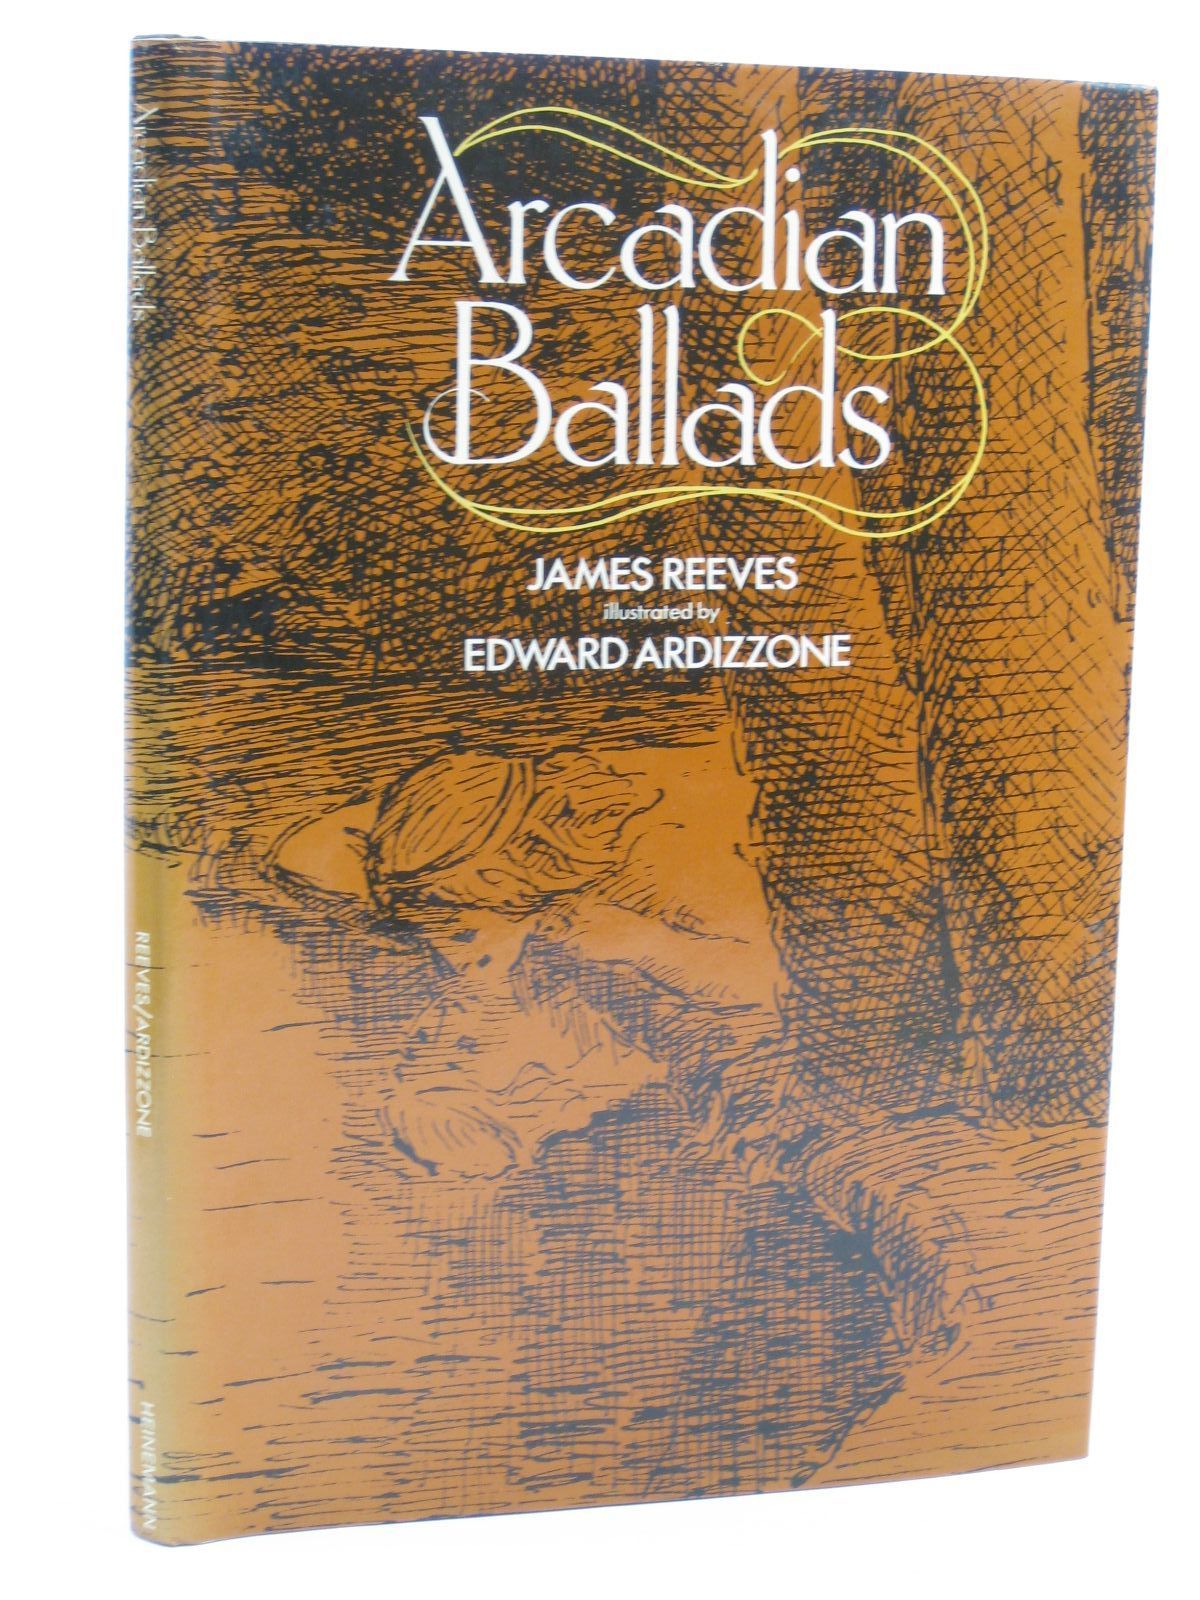 Photo of ARCADIAN BALLADS written by Reeves, James illustrated by Ardizzone, Edward published by Heinemann Educational Books (STOCK CODE: 1406638)  for sale by Stella & Rose's Books